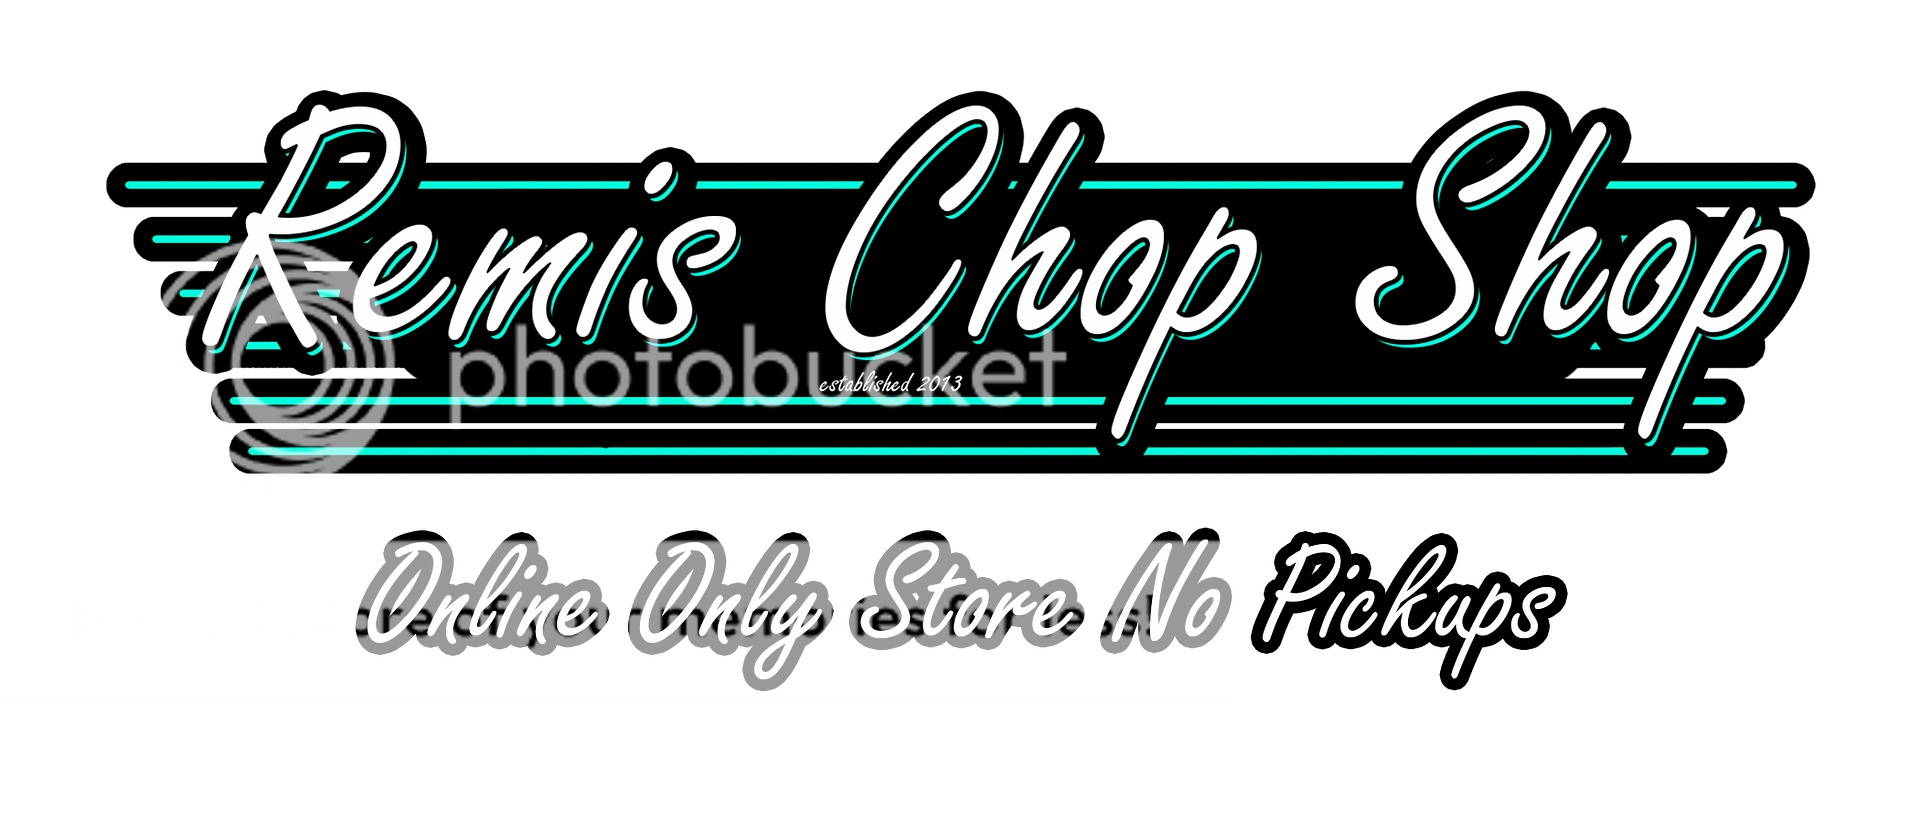  photo New Company Logo For Ebay Listings_zps01wgv56f.png